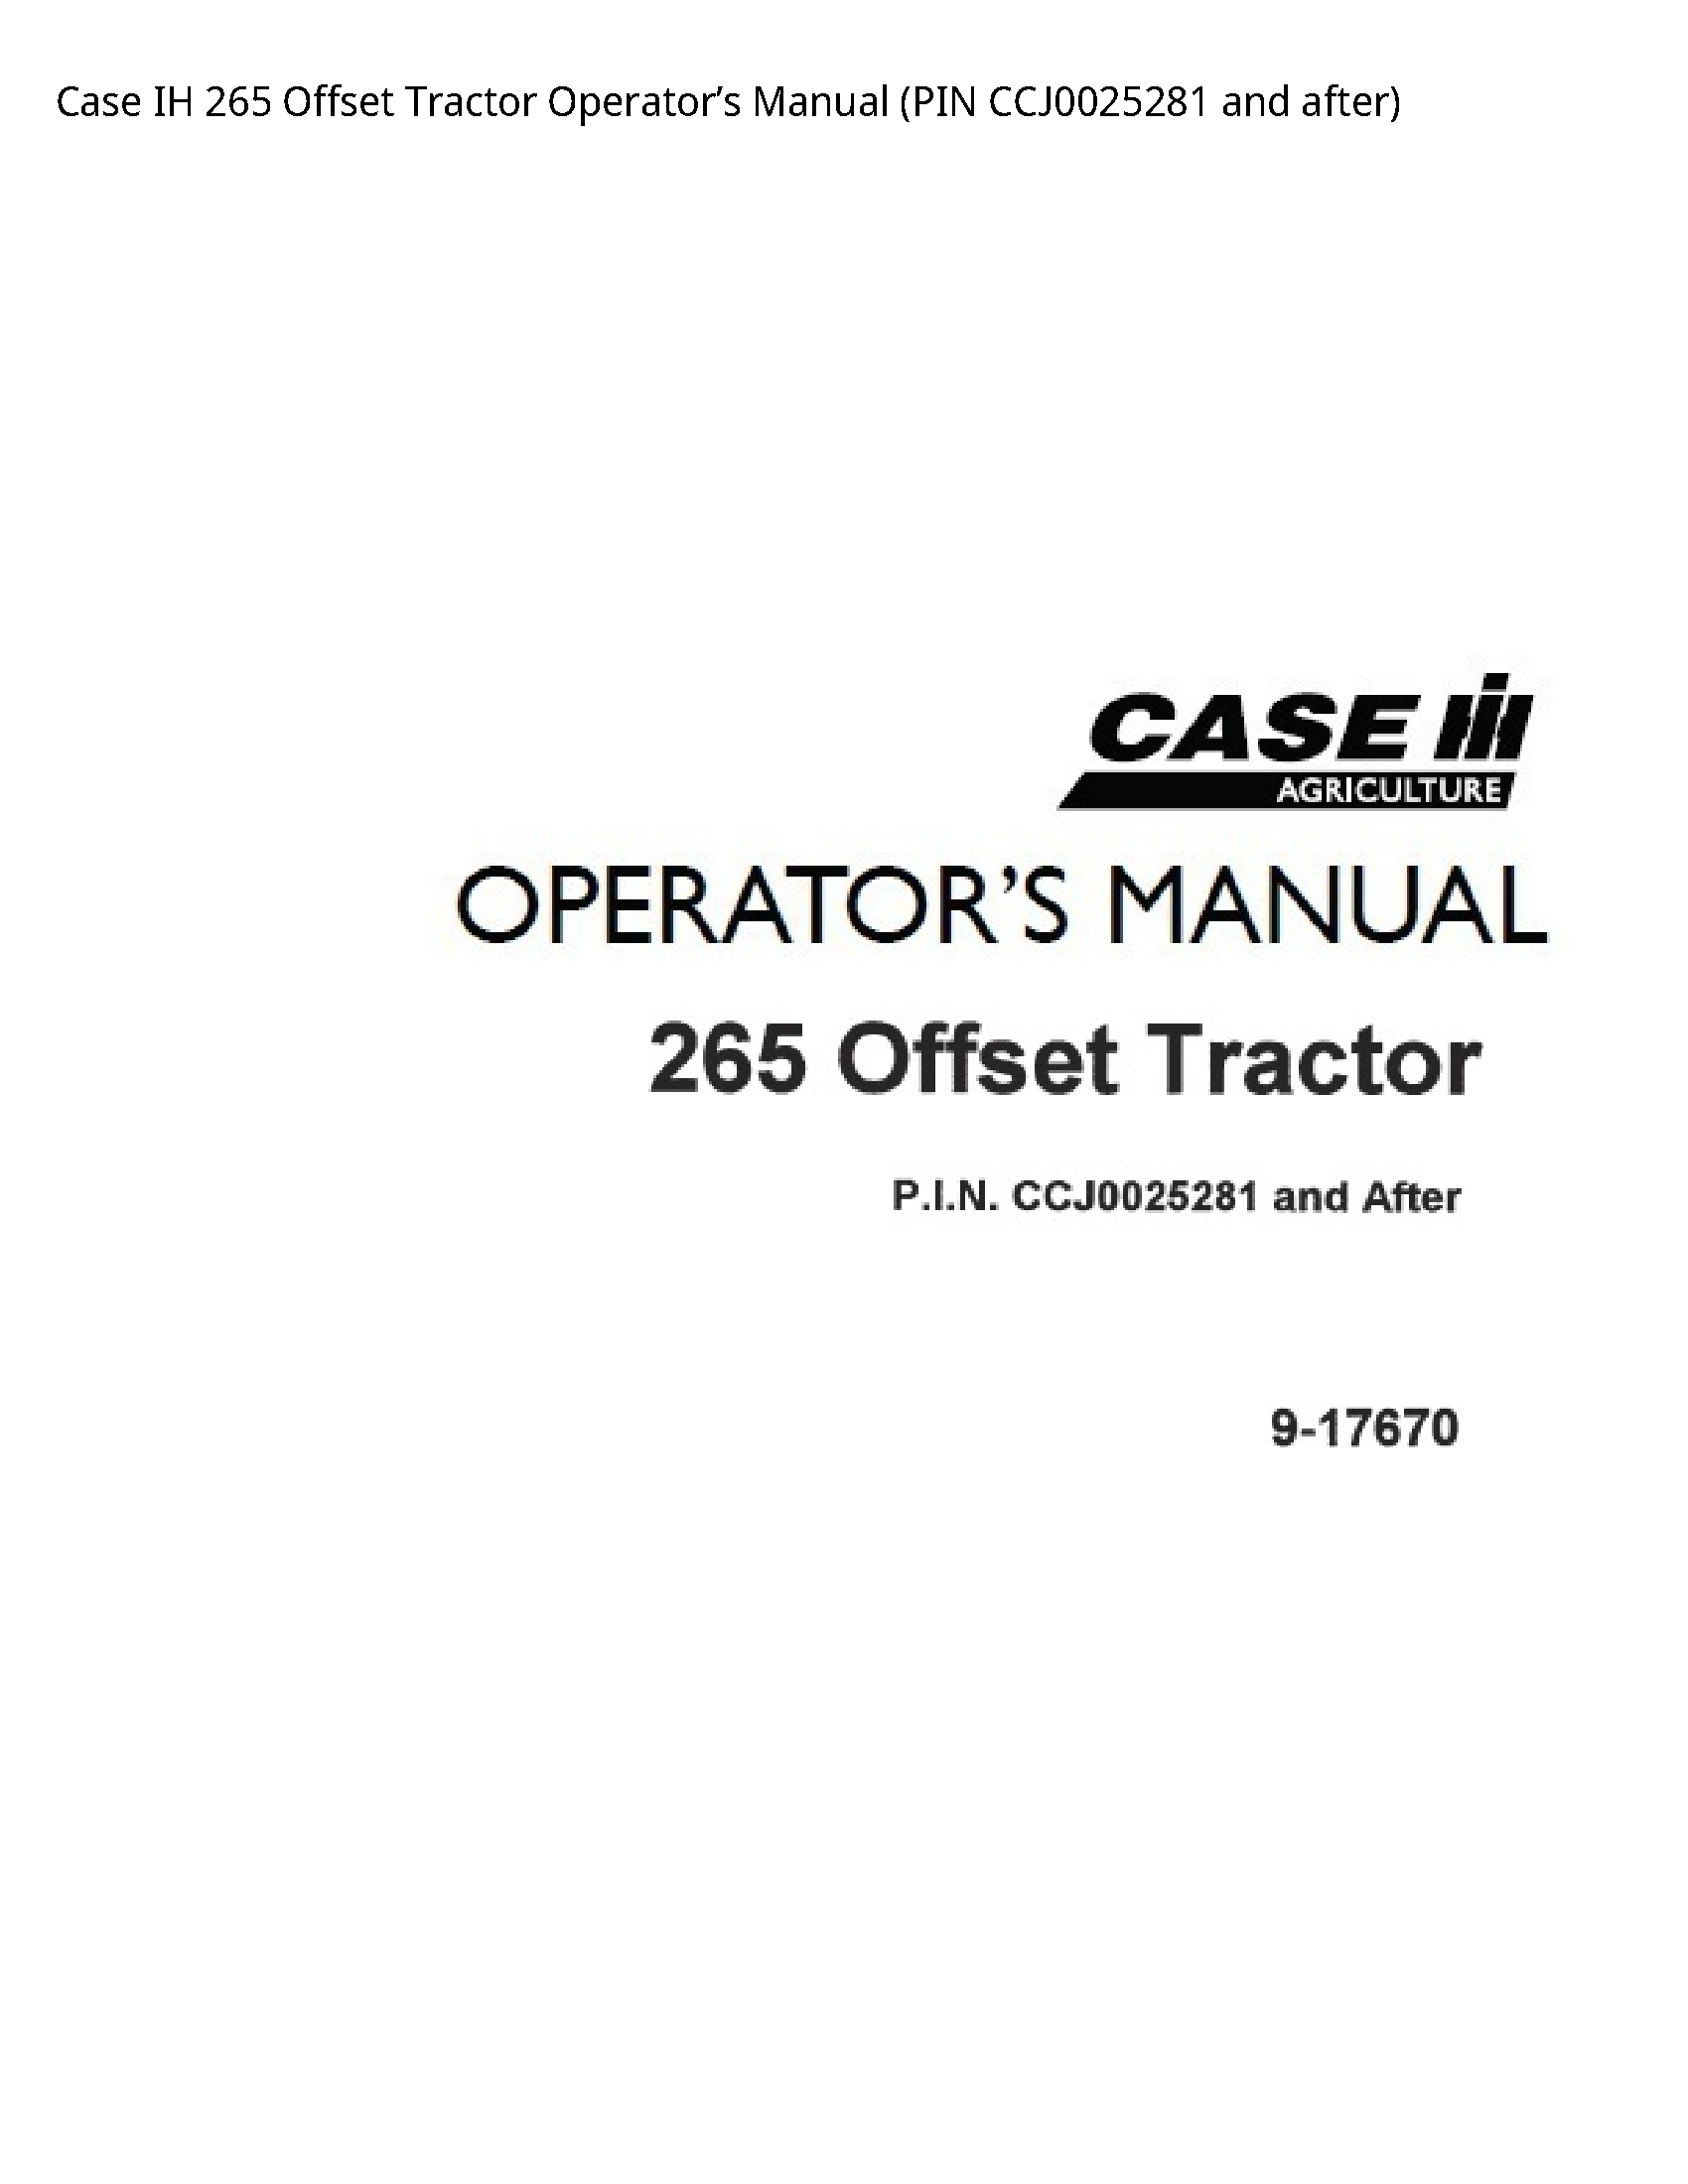 Case/Case IH 265 IH Offset Tractor Operator’s manual